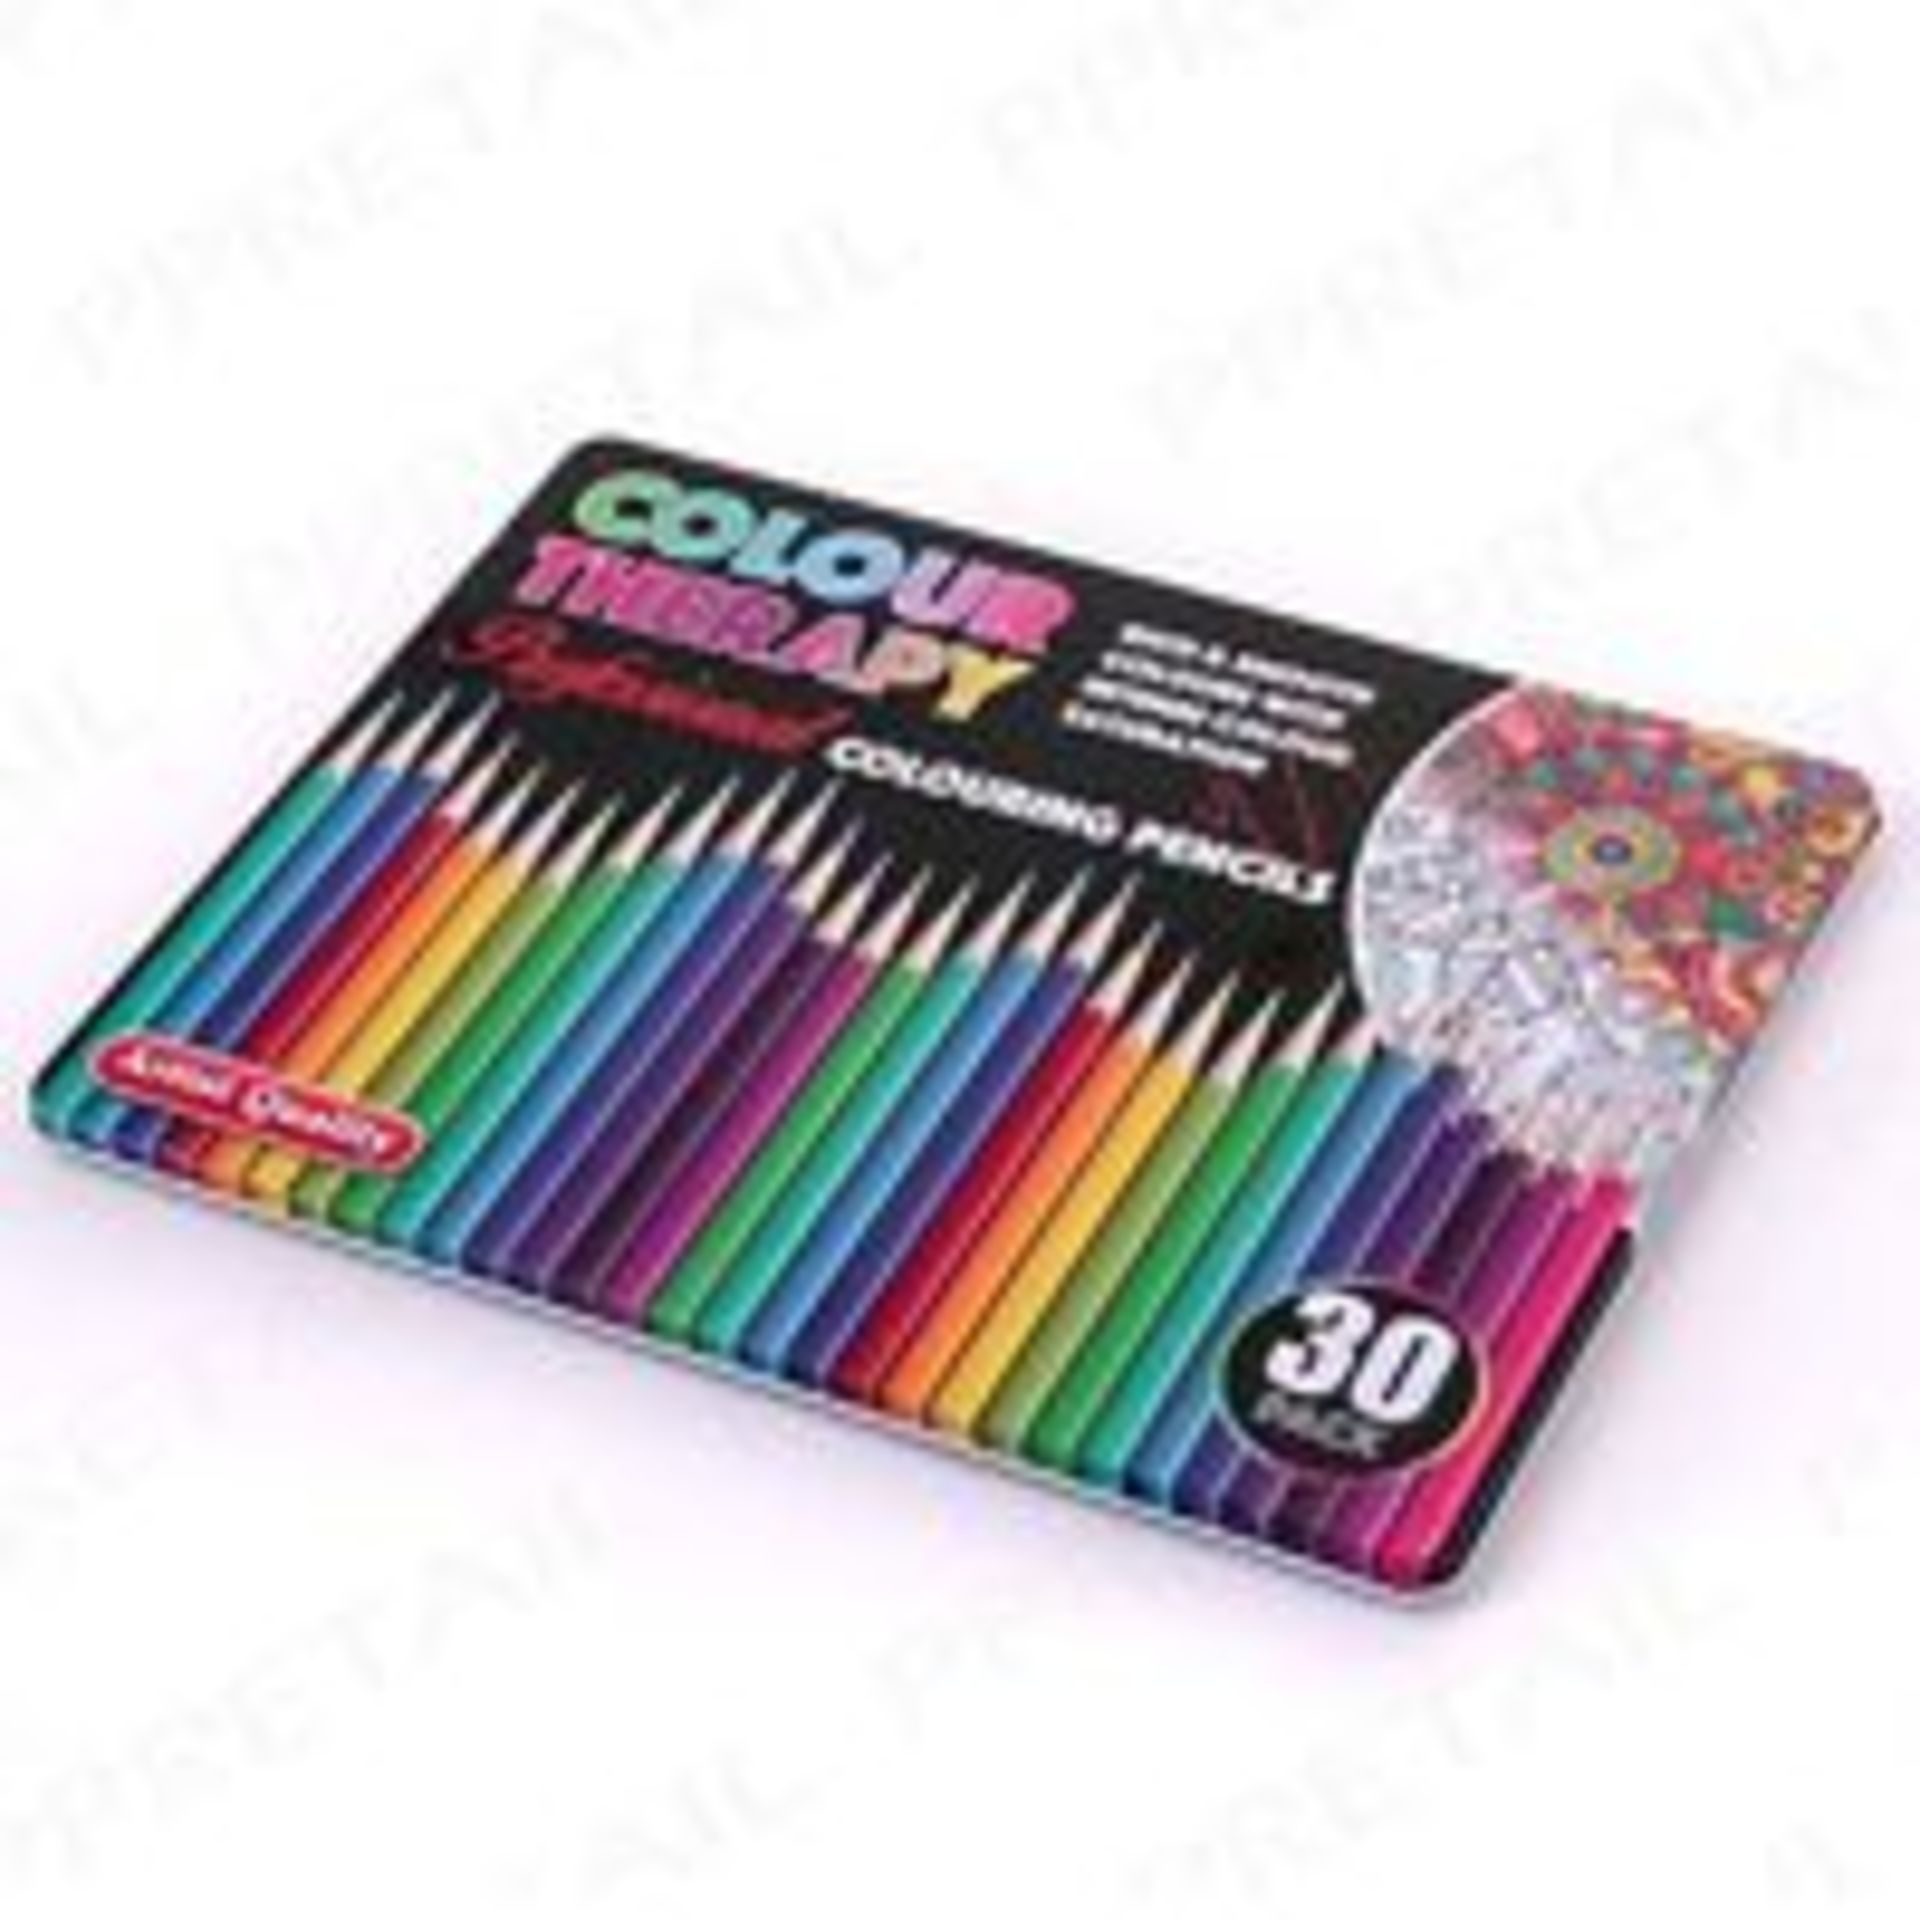 V *TRADE QTY* Brand New 30 Pack Professional Colouring Pencils - Artist Quality X 3 YOUR BID PRICE